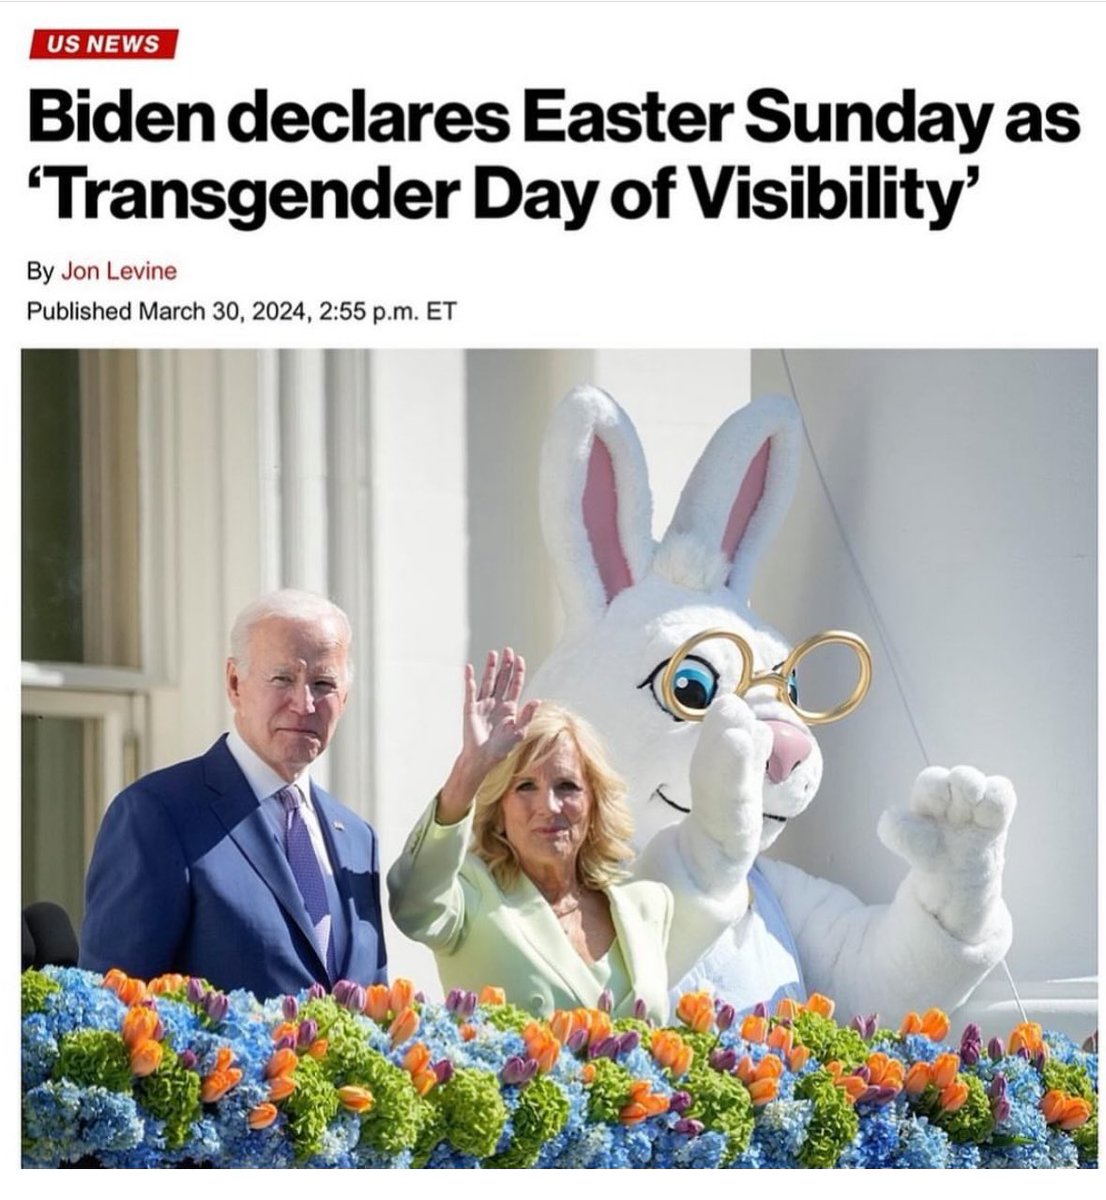 This is really hard to believe. President Biden issued a proclamation recognizing March 31 as Transgender Day of Visibility. This is also the date of Easter where we celebrate the fact that Jesus Christ rose from the dead. What is the president thinking? This is a profound…